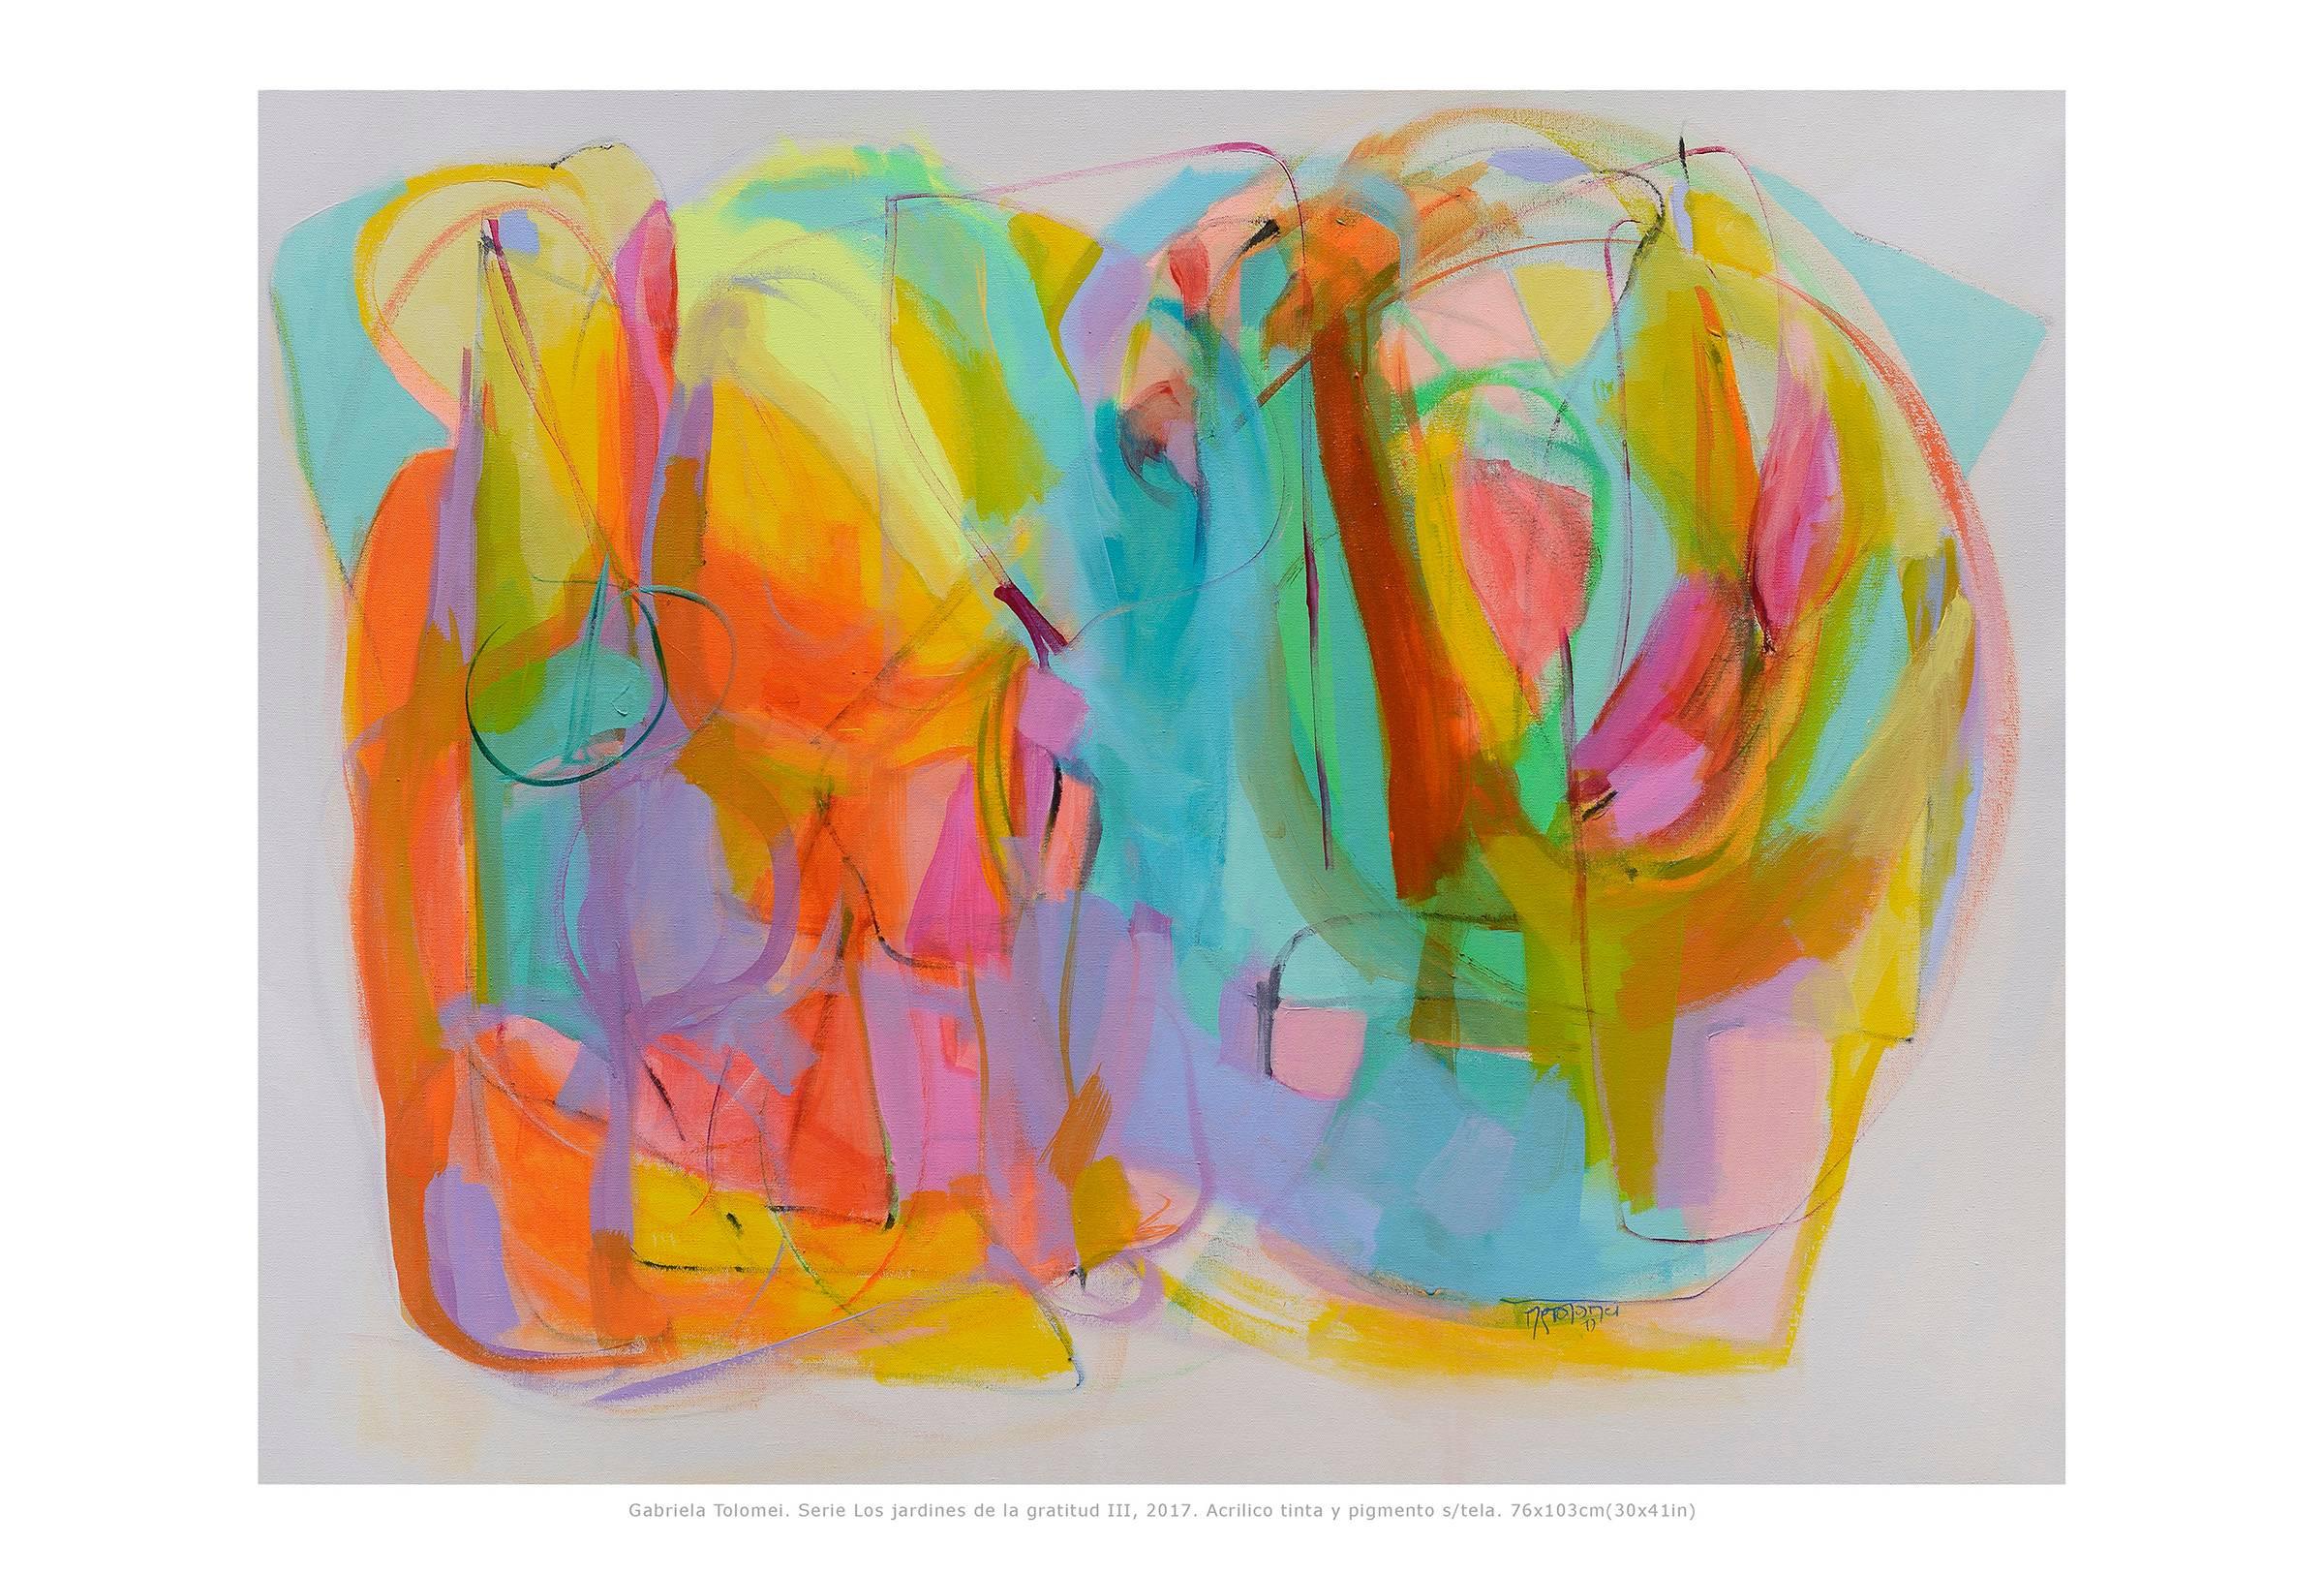 Tolomei uses her mastery of colors to create powerful abstract compositions. Her bold expressive brush strokes and fields of colors fills the canvas while the vibrant color combinations give her works power. All her paintings are filled with energy,